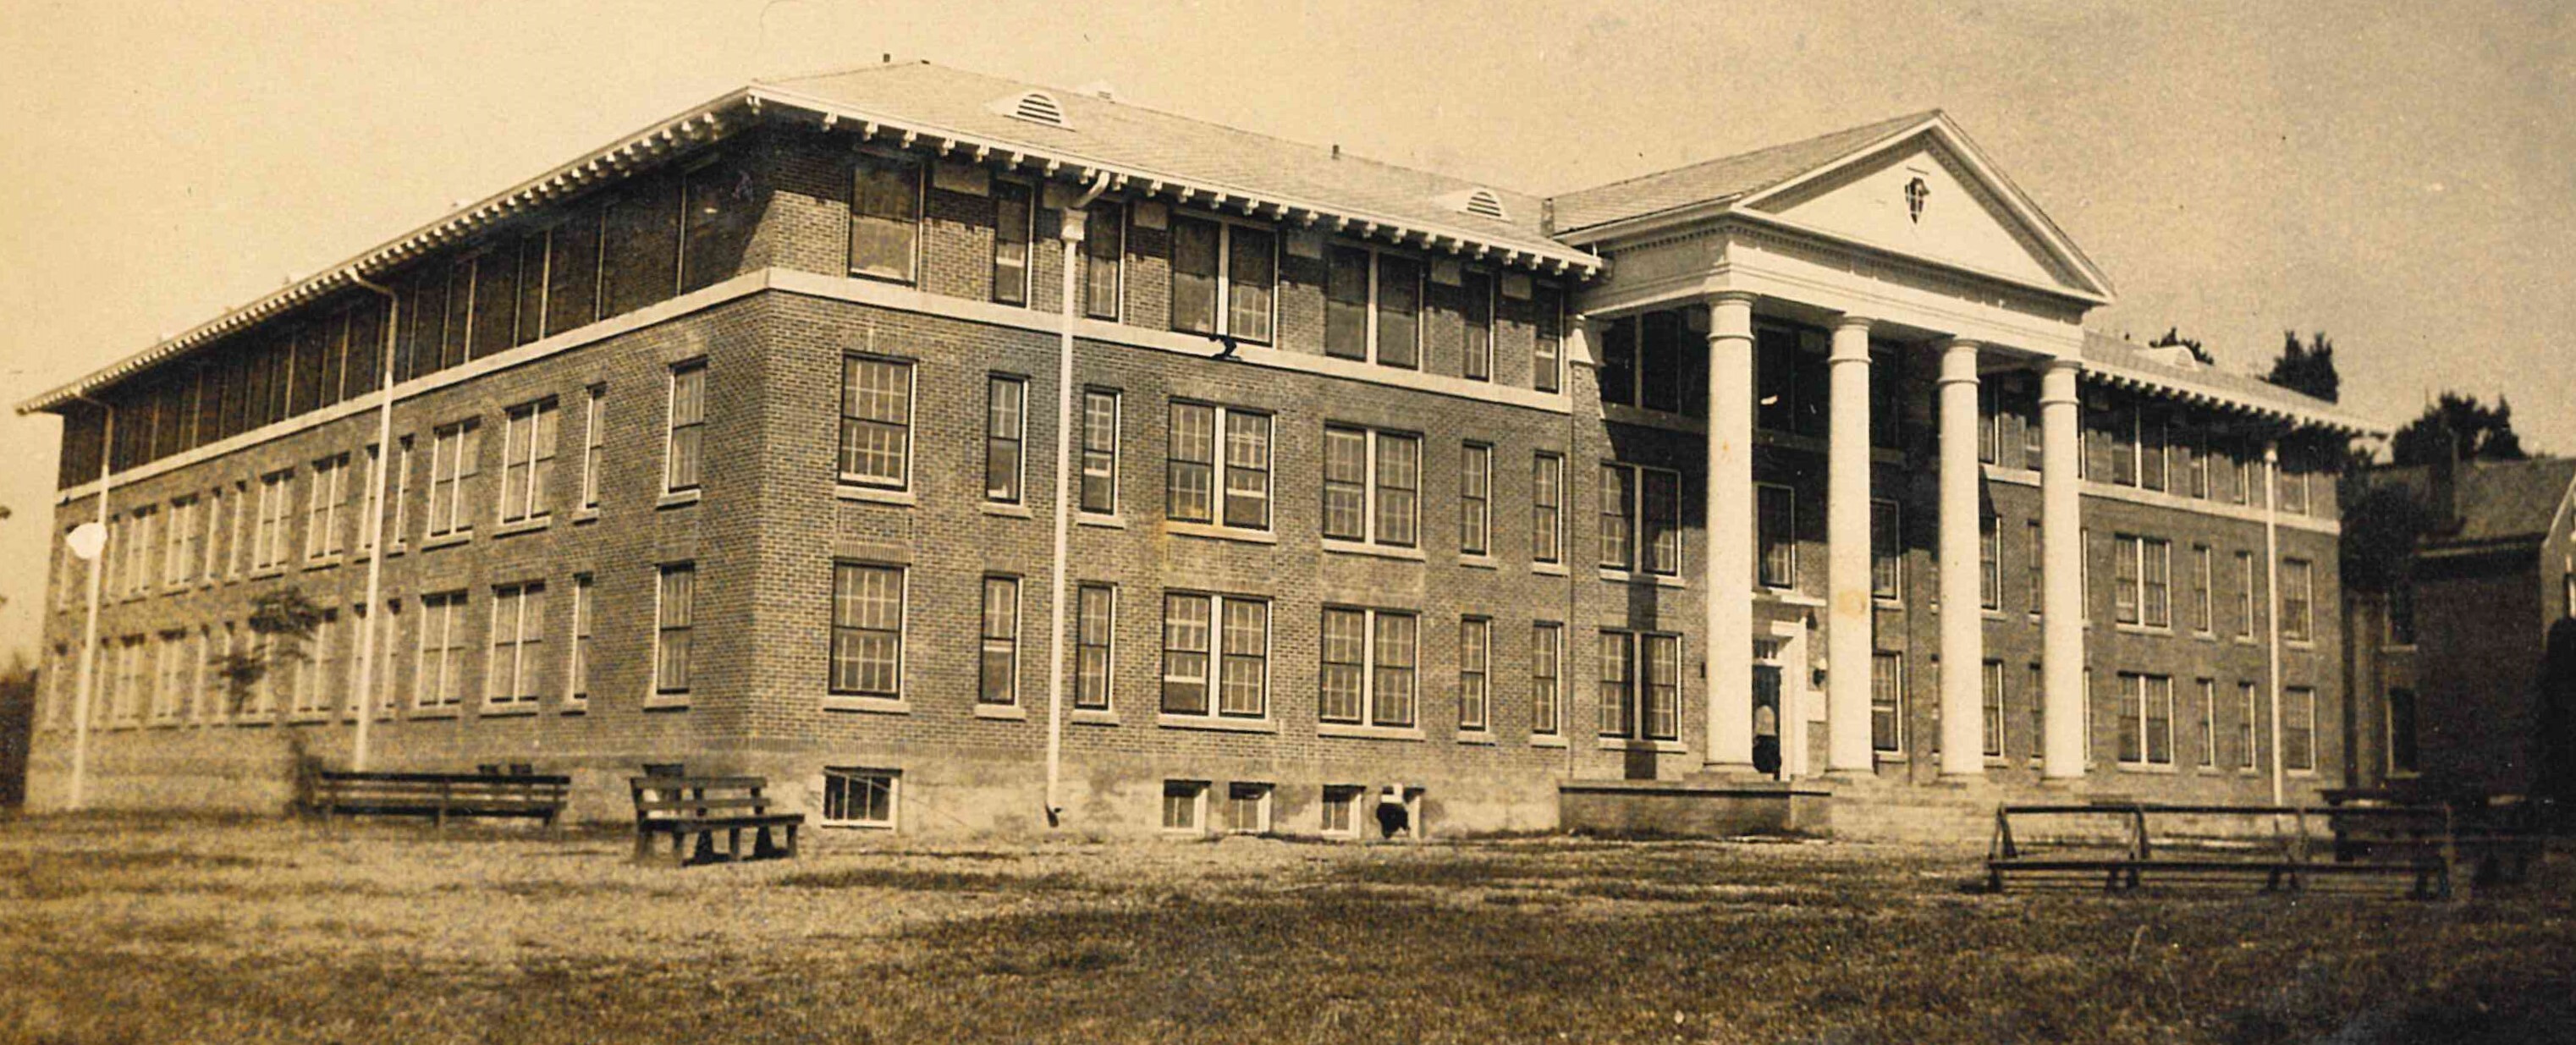 An early photo of Cone-Bottoms Hall at Ouachita Baptist University